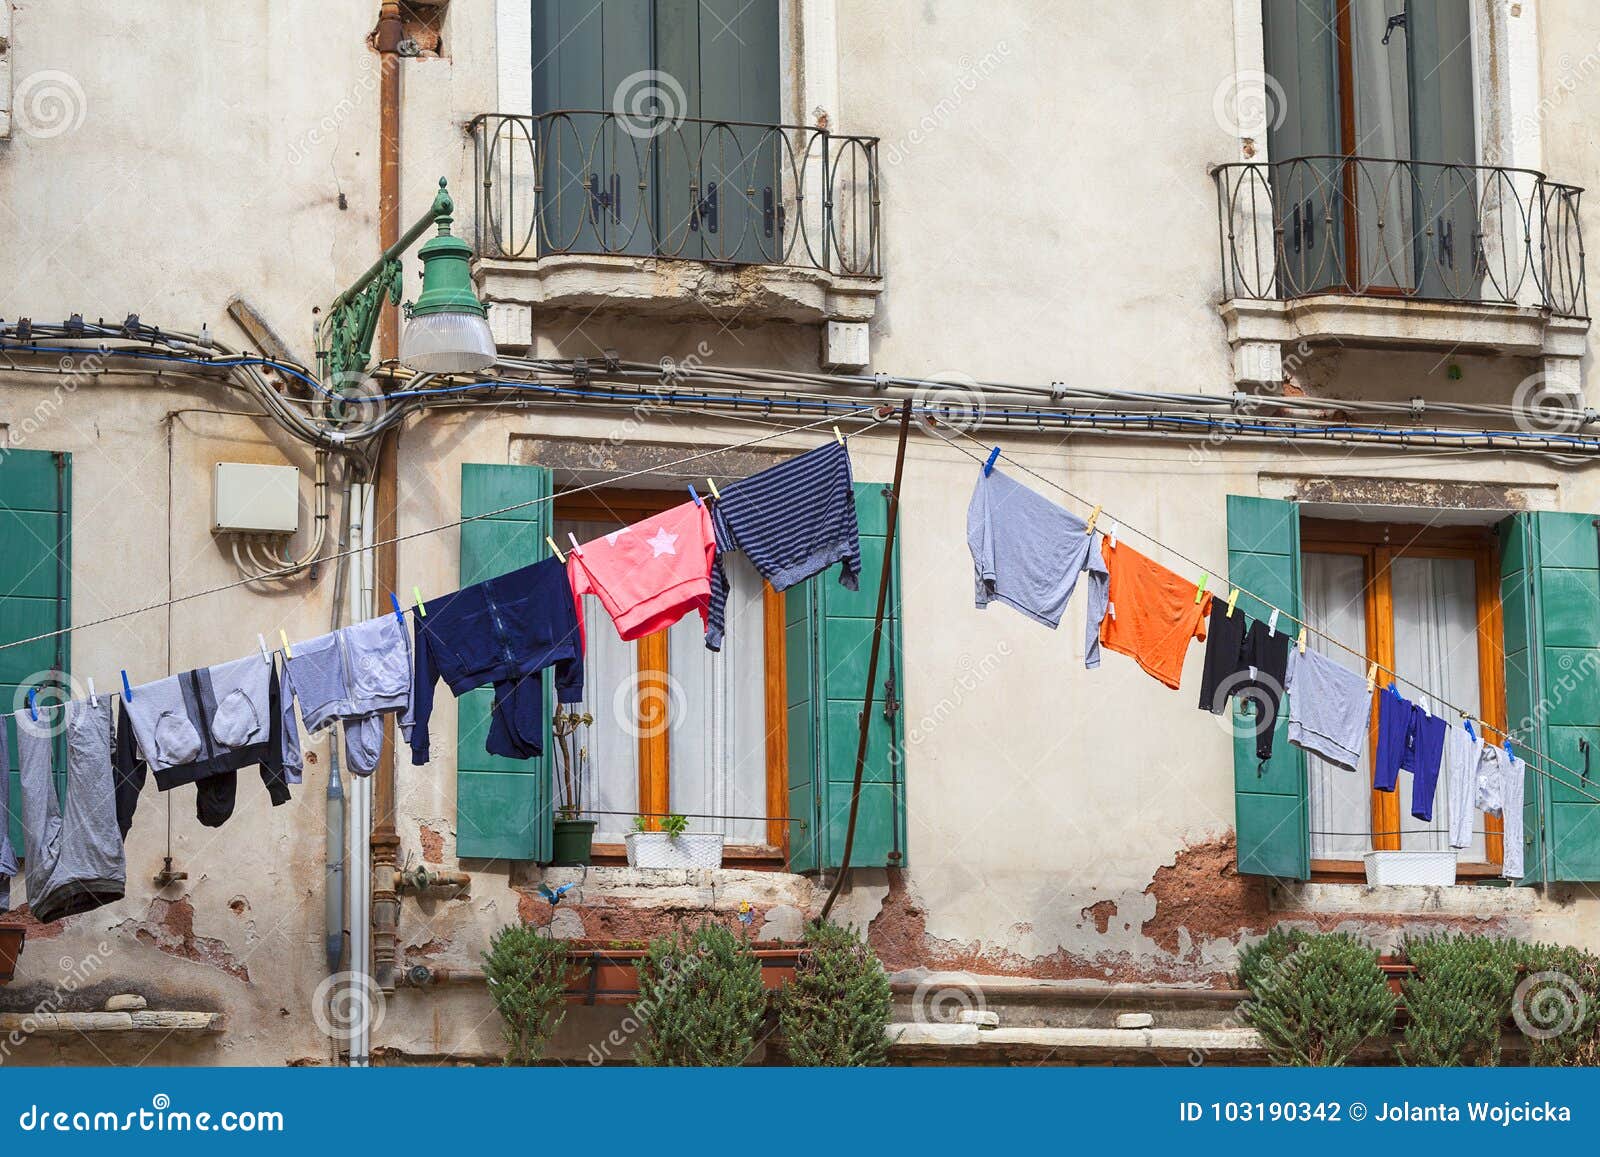 Typical View; the Streets of Venice; Washed Clothes Drying on Cords ...